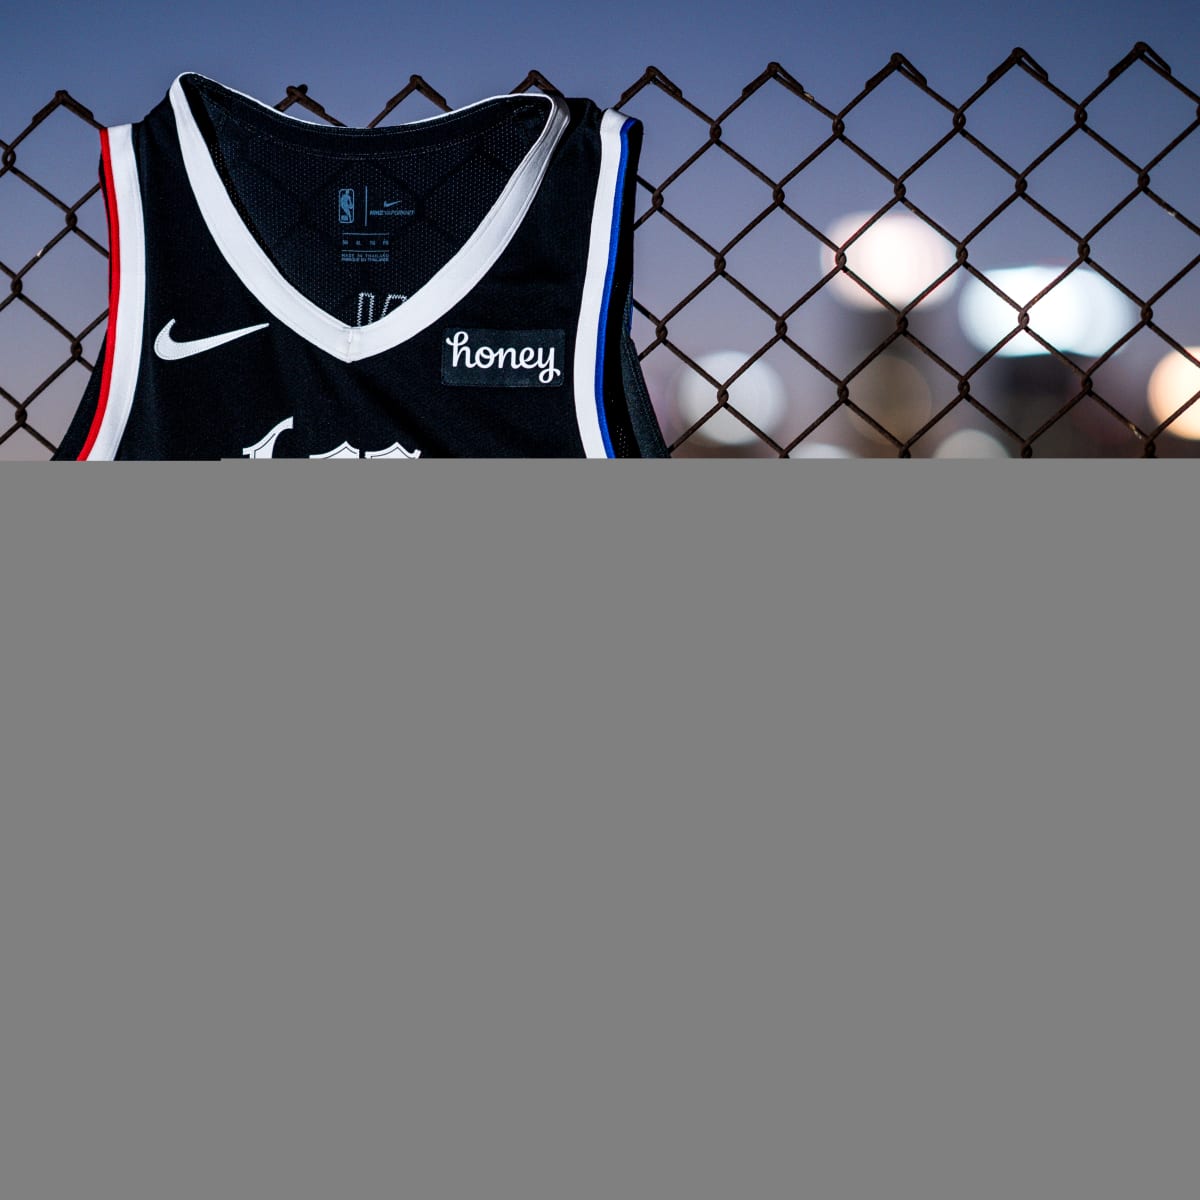 LA Clippers Unveil New City Edition Uniforms On Sports Illustrated Cover -  CBS Los Angeles